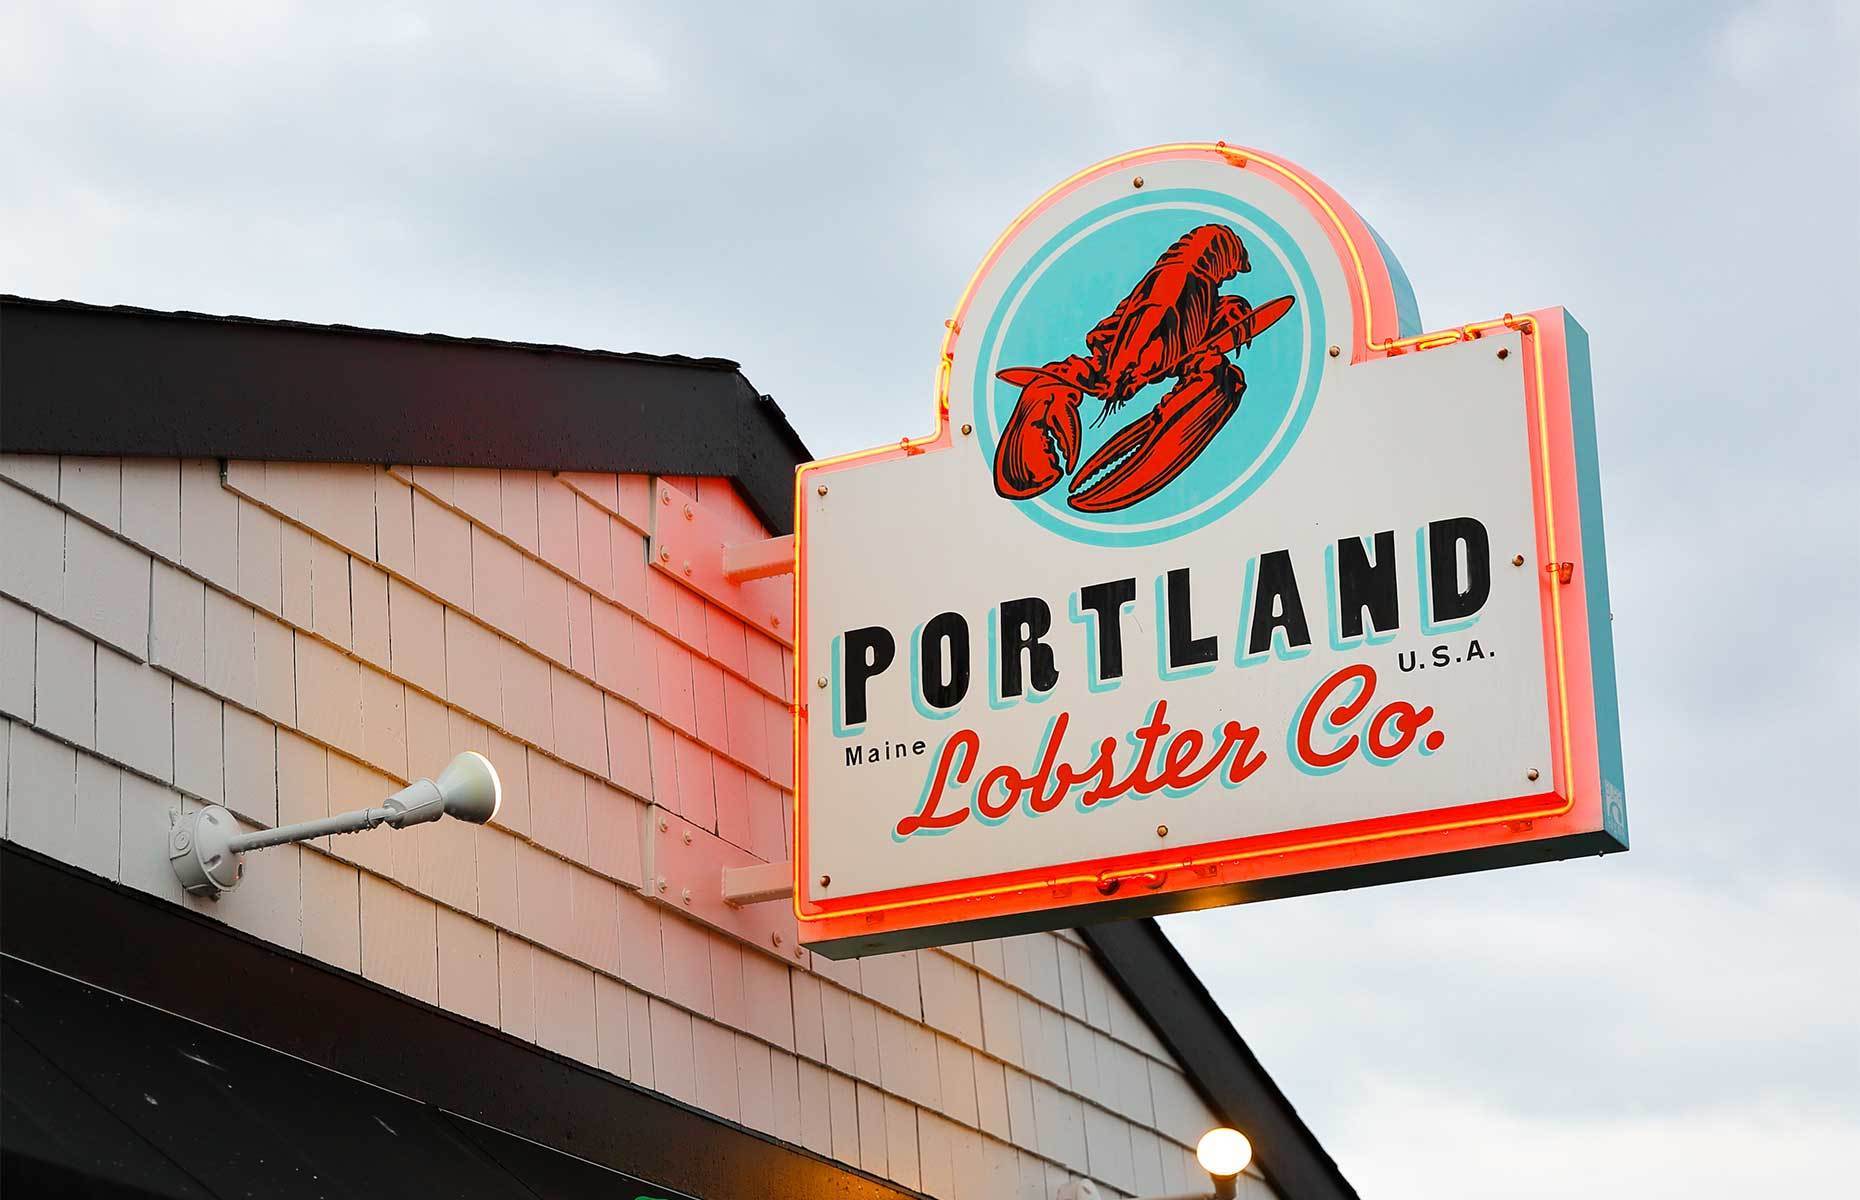 <p class="p1"><span>Check out the wide range of Portland’s fabulous restaurants. Did you know that <a href="https://www.visitportland.com/things-to-do/cruises-tours/food-wine-beer" rel="noreferrer noopener"><span>guided tours are available for foodies</span></a> and <a href="https://www.visitportland.com/things-to-do/cruises-tours/breweries-distilleries" rel="noreferrer noopener"><span>beer enthusiasts</span></a>?</span></p>